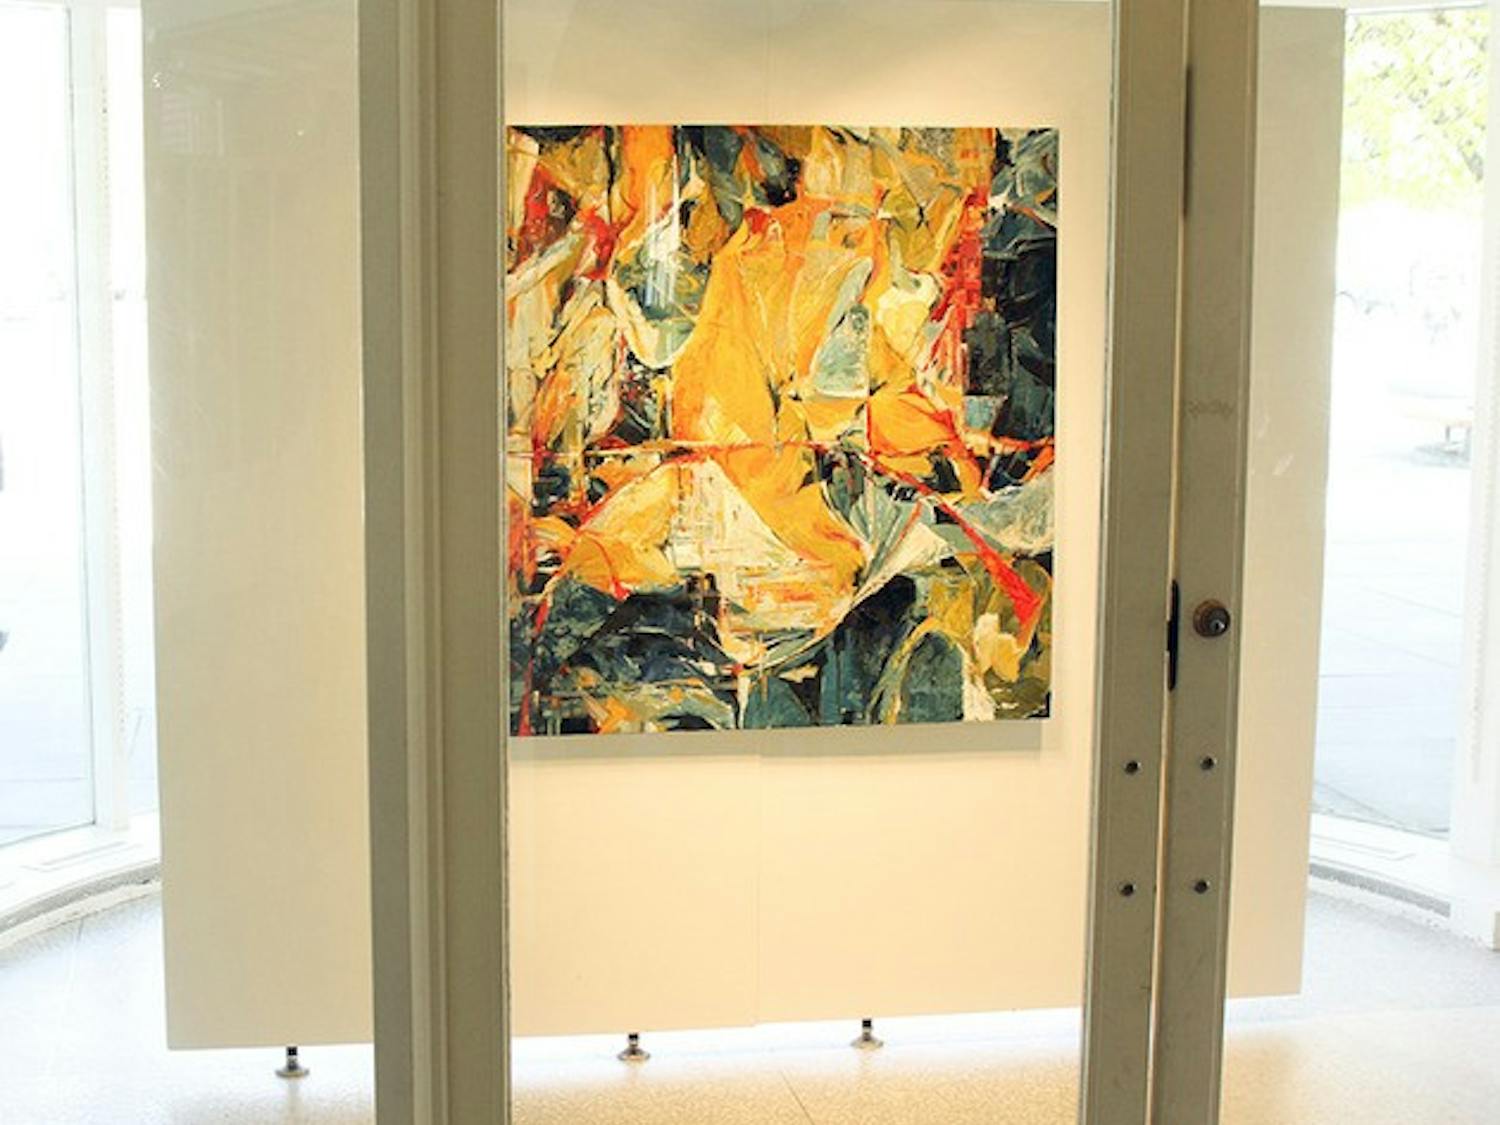 The abstract expressionist artwork of Natalia Wrobel '11 will be on display in the Barrows Rotunda until May 20. 